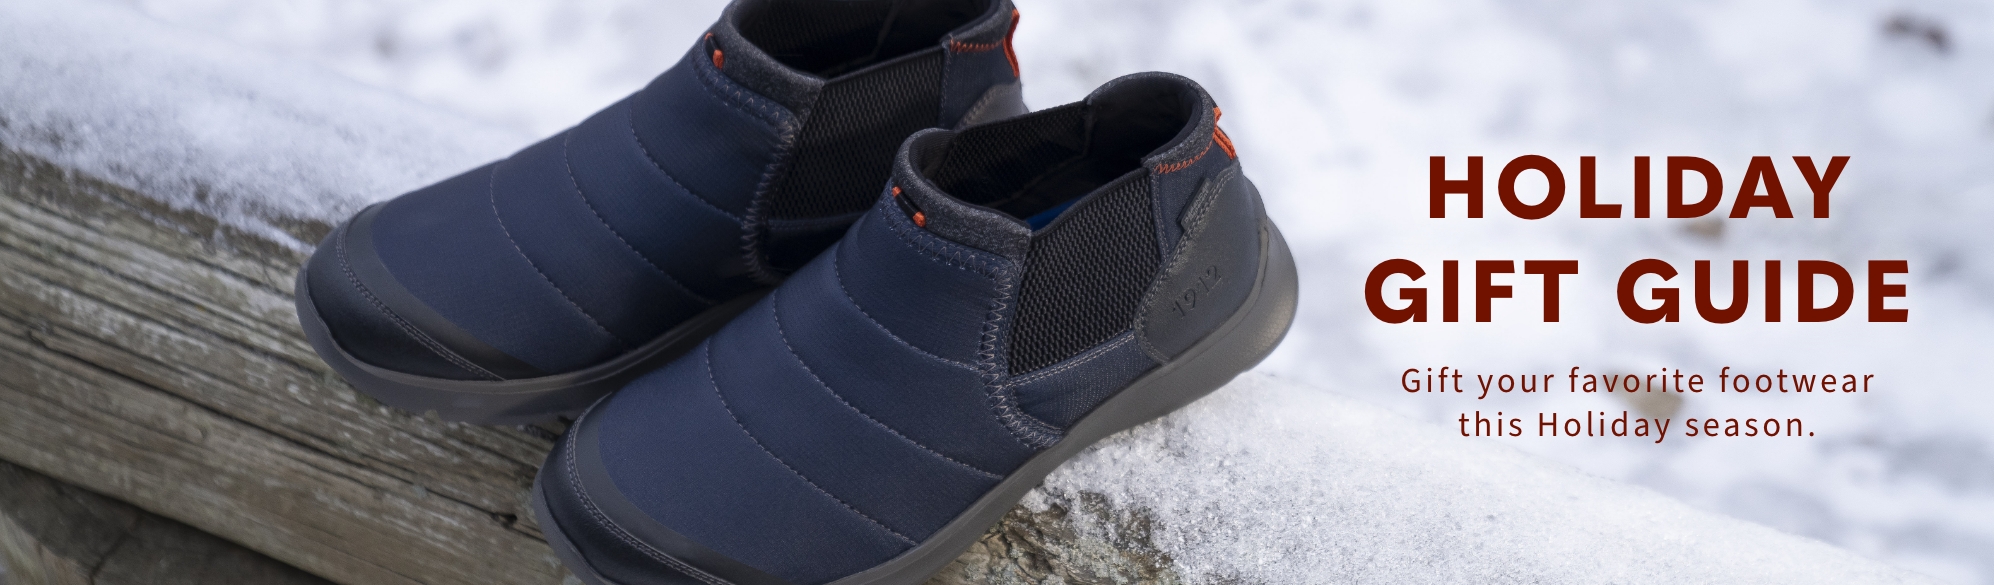 Holiday Gift Guide Shop our holiday gift guide. Image features the Bushwacker boot in navy.